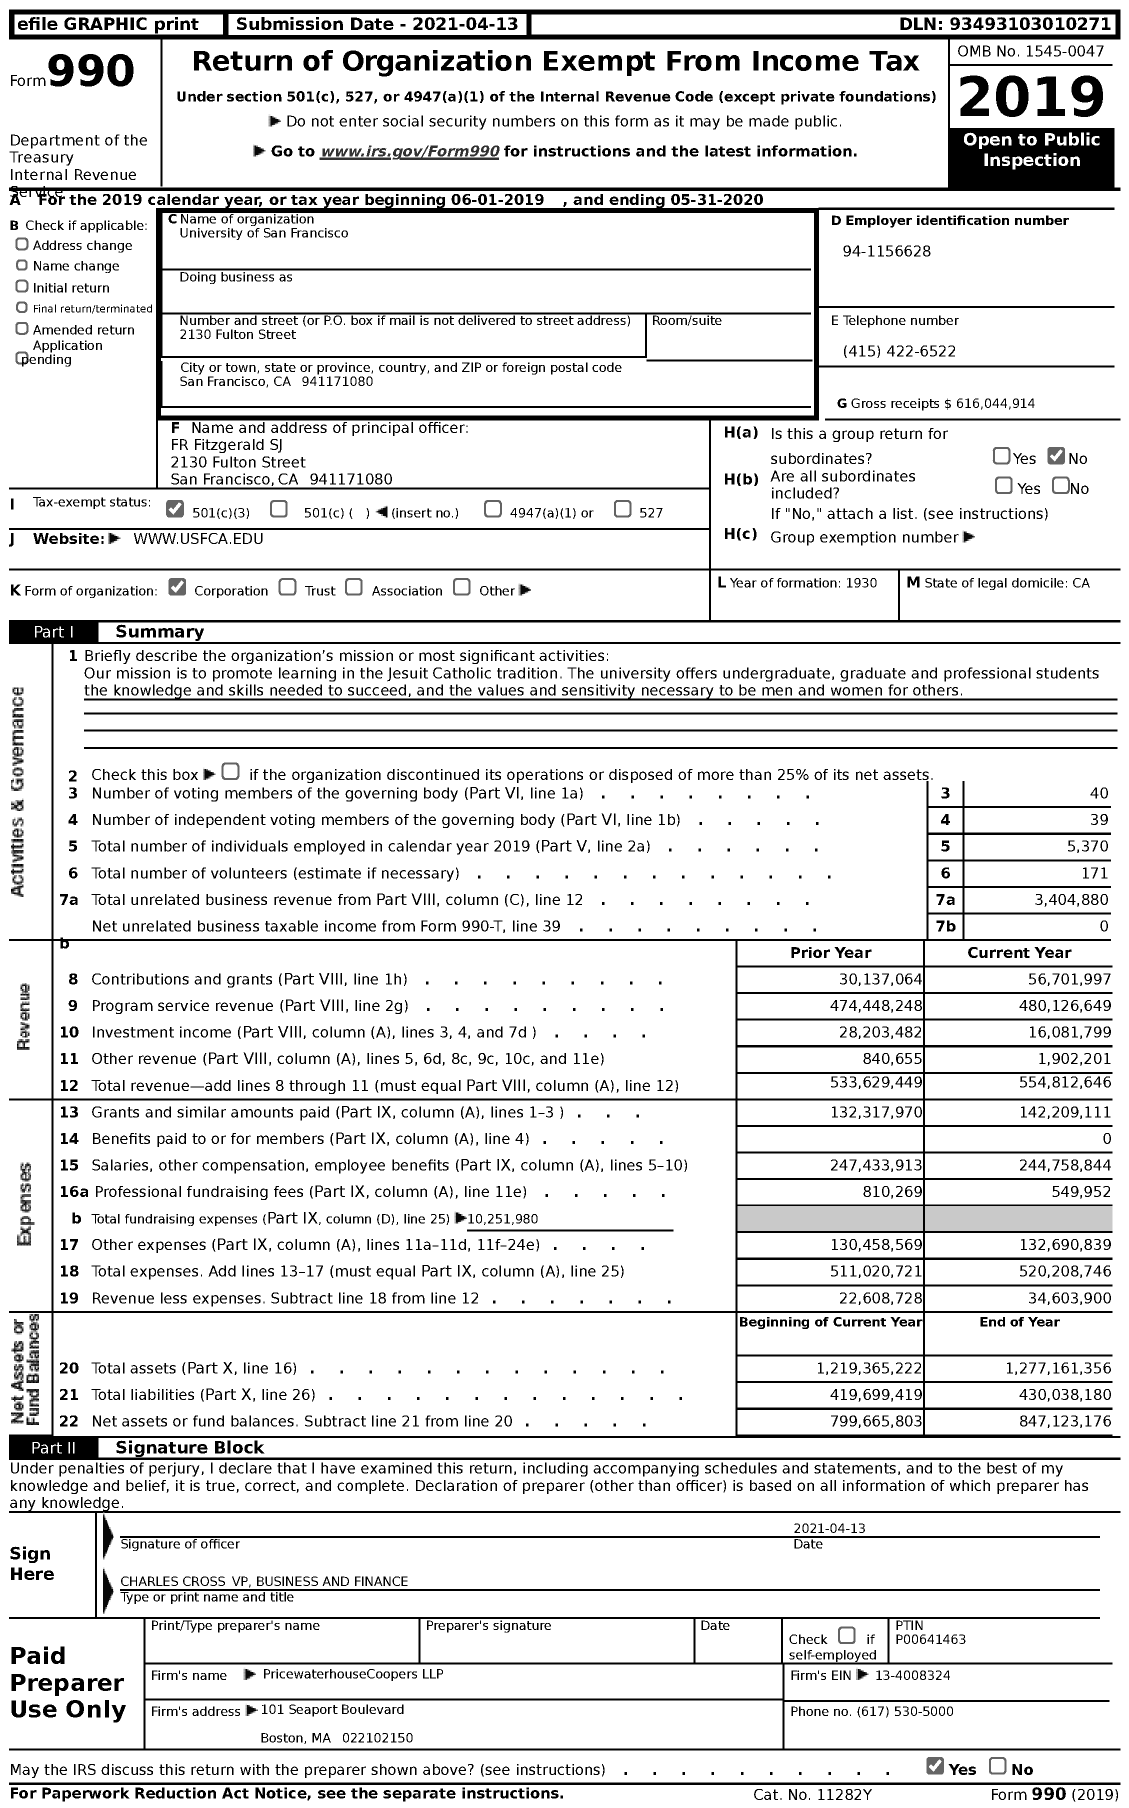 Image of first page of 2019 Form 990 for University of San Francisco (USF)